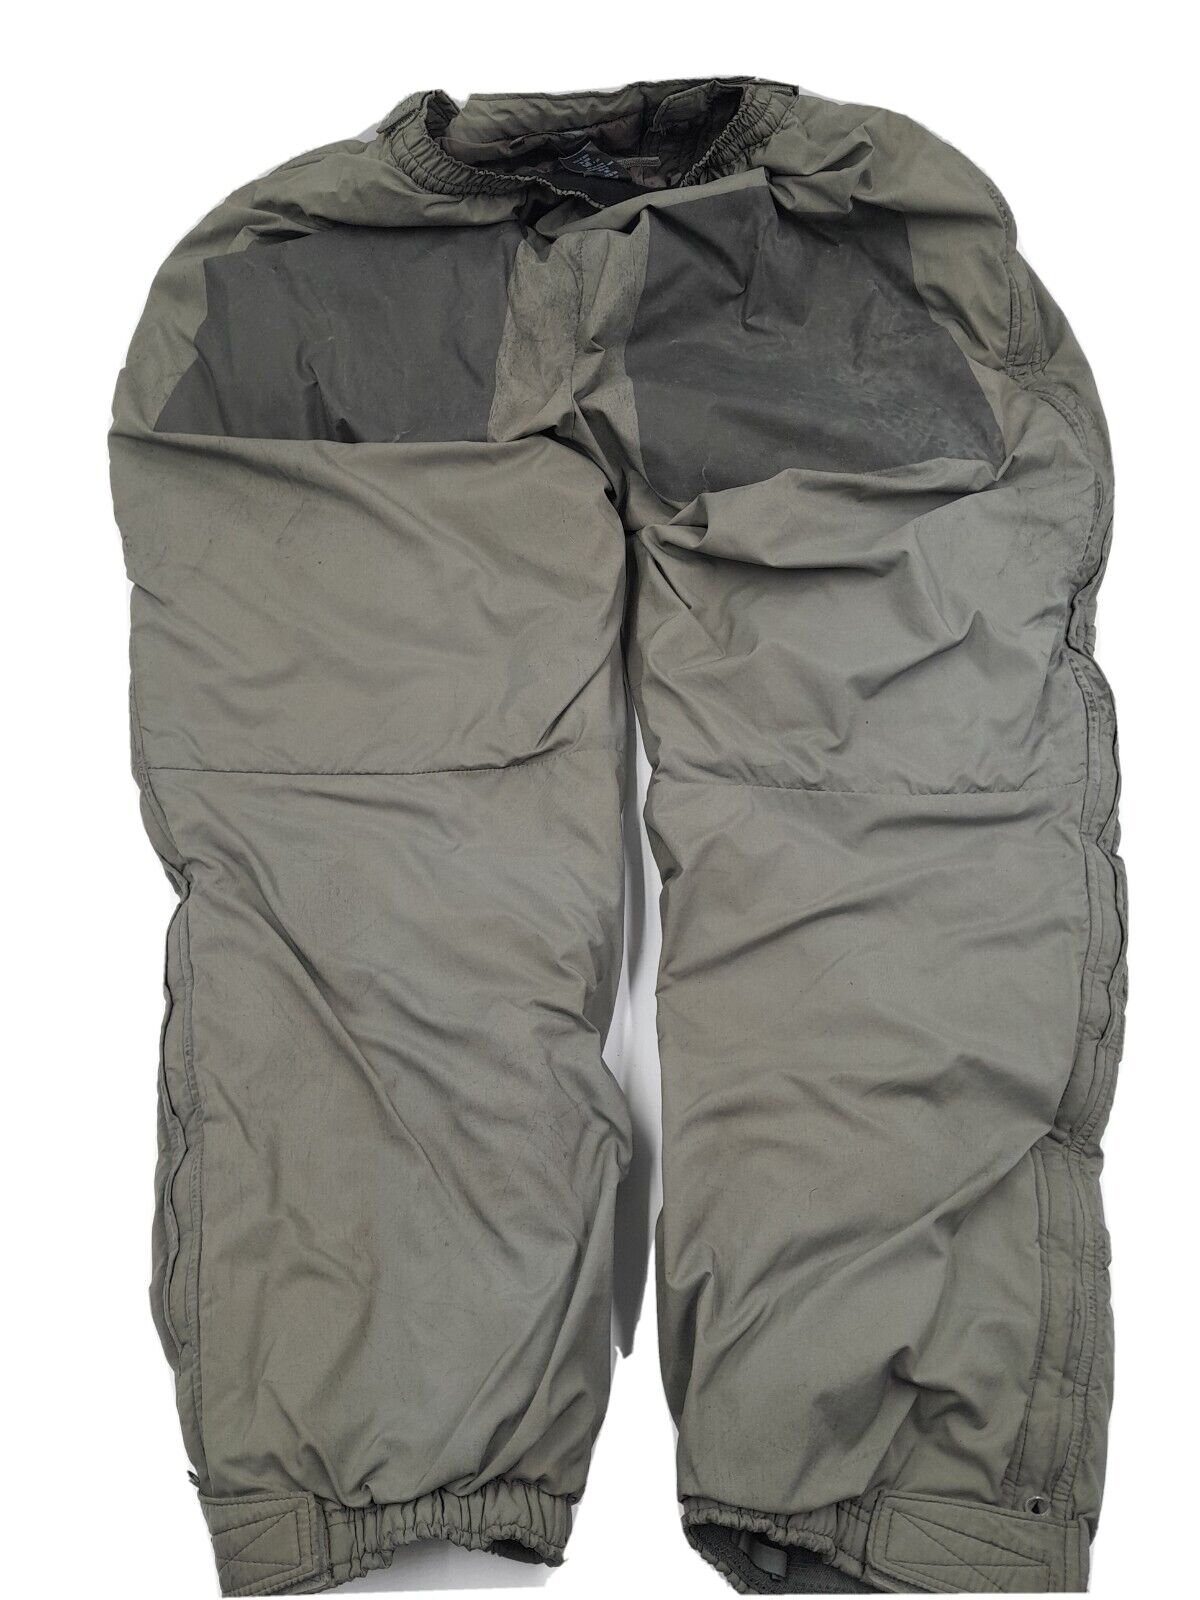 Extreme Cold Weather Pants, ECWCS Gen III Level 7 Trousers Large RegBG 131